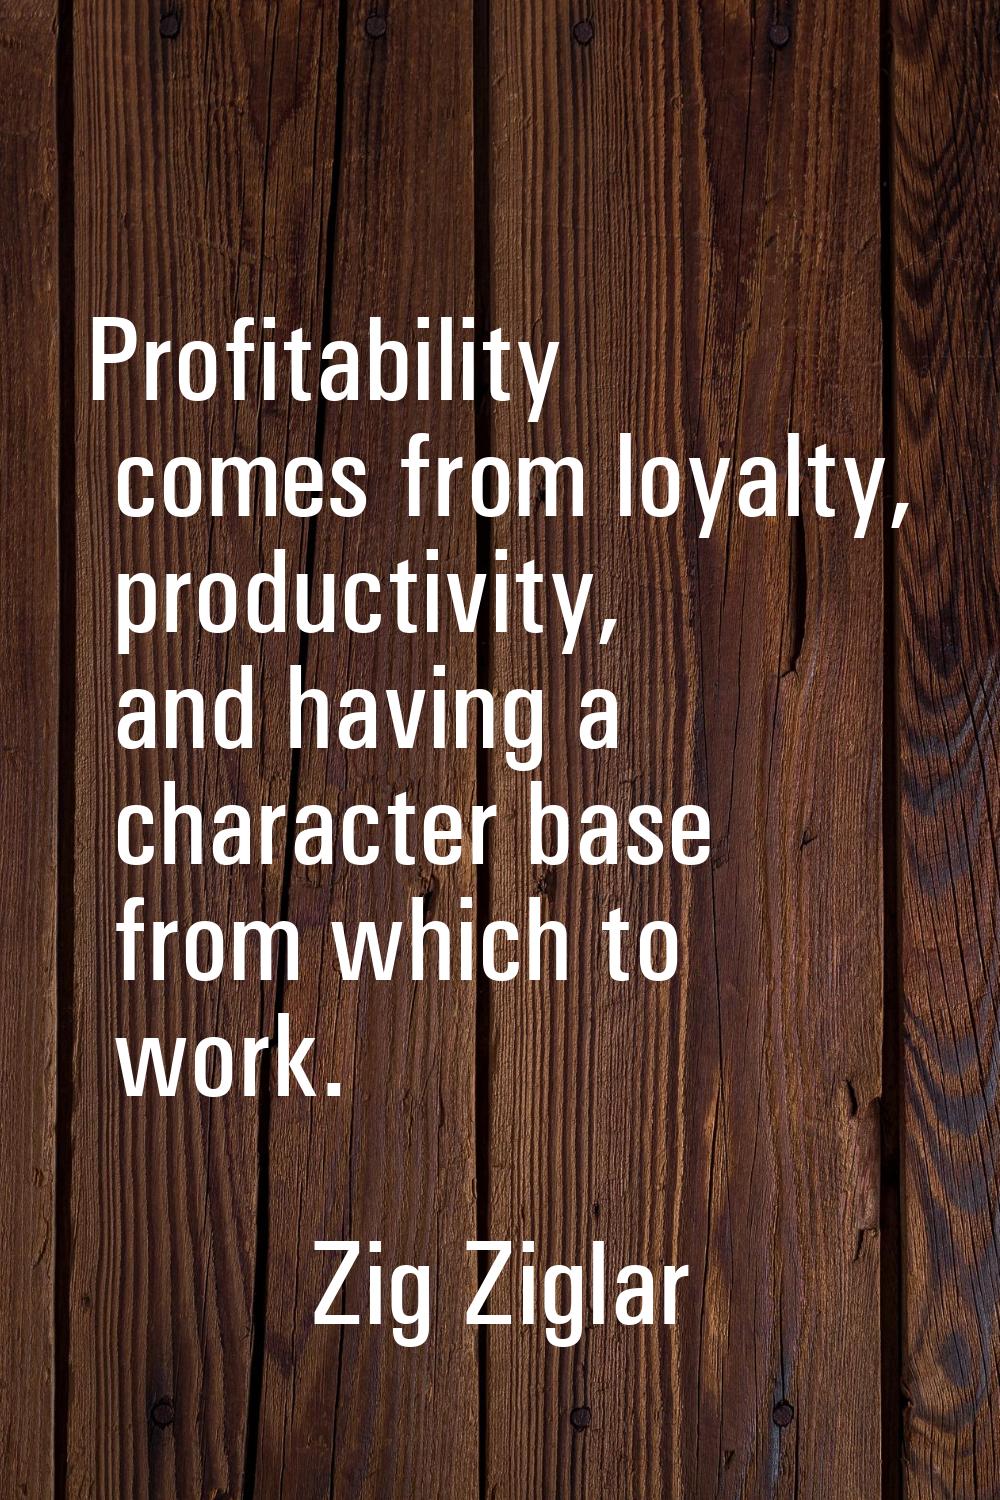 Profitability comes from loyalty, productivity, and having a character base from which to work.